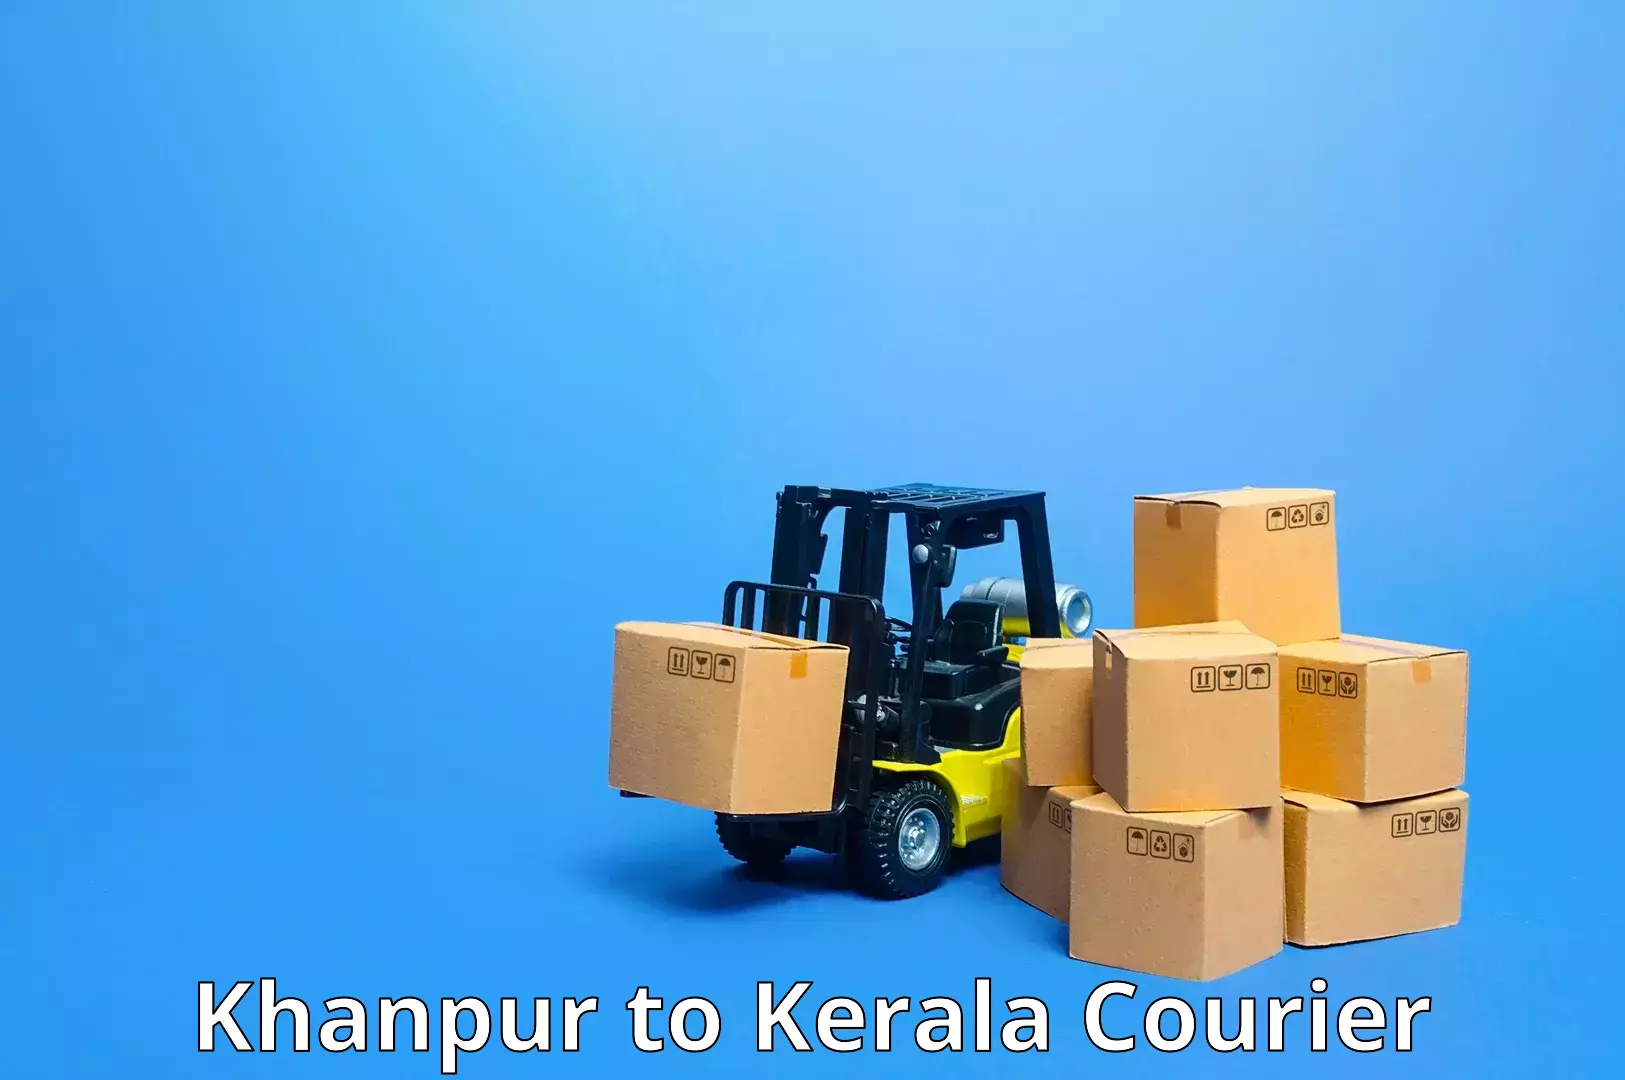 Comprehensive shipping network Khanpur to Pathanamthitta